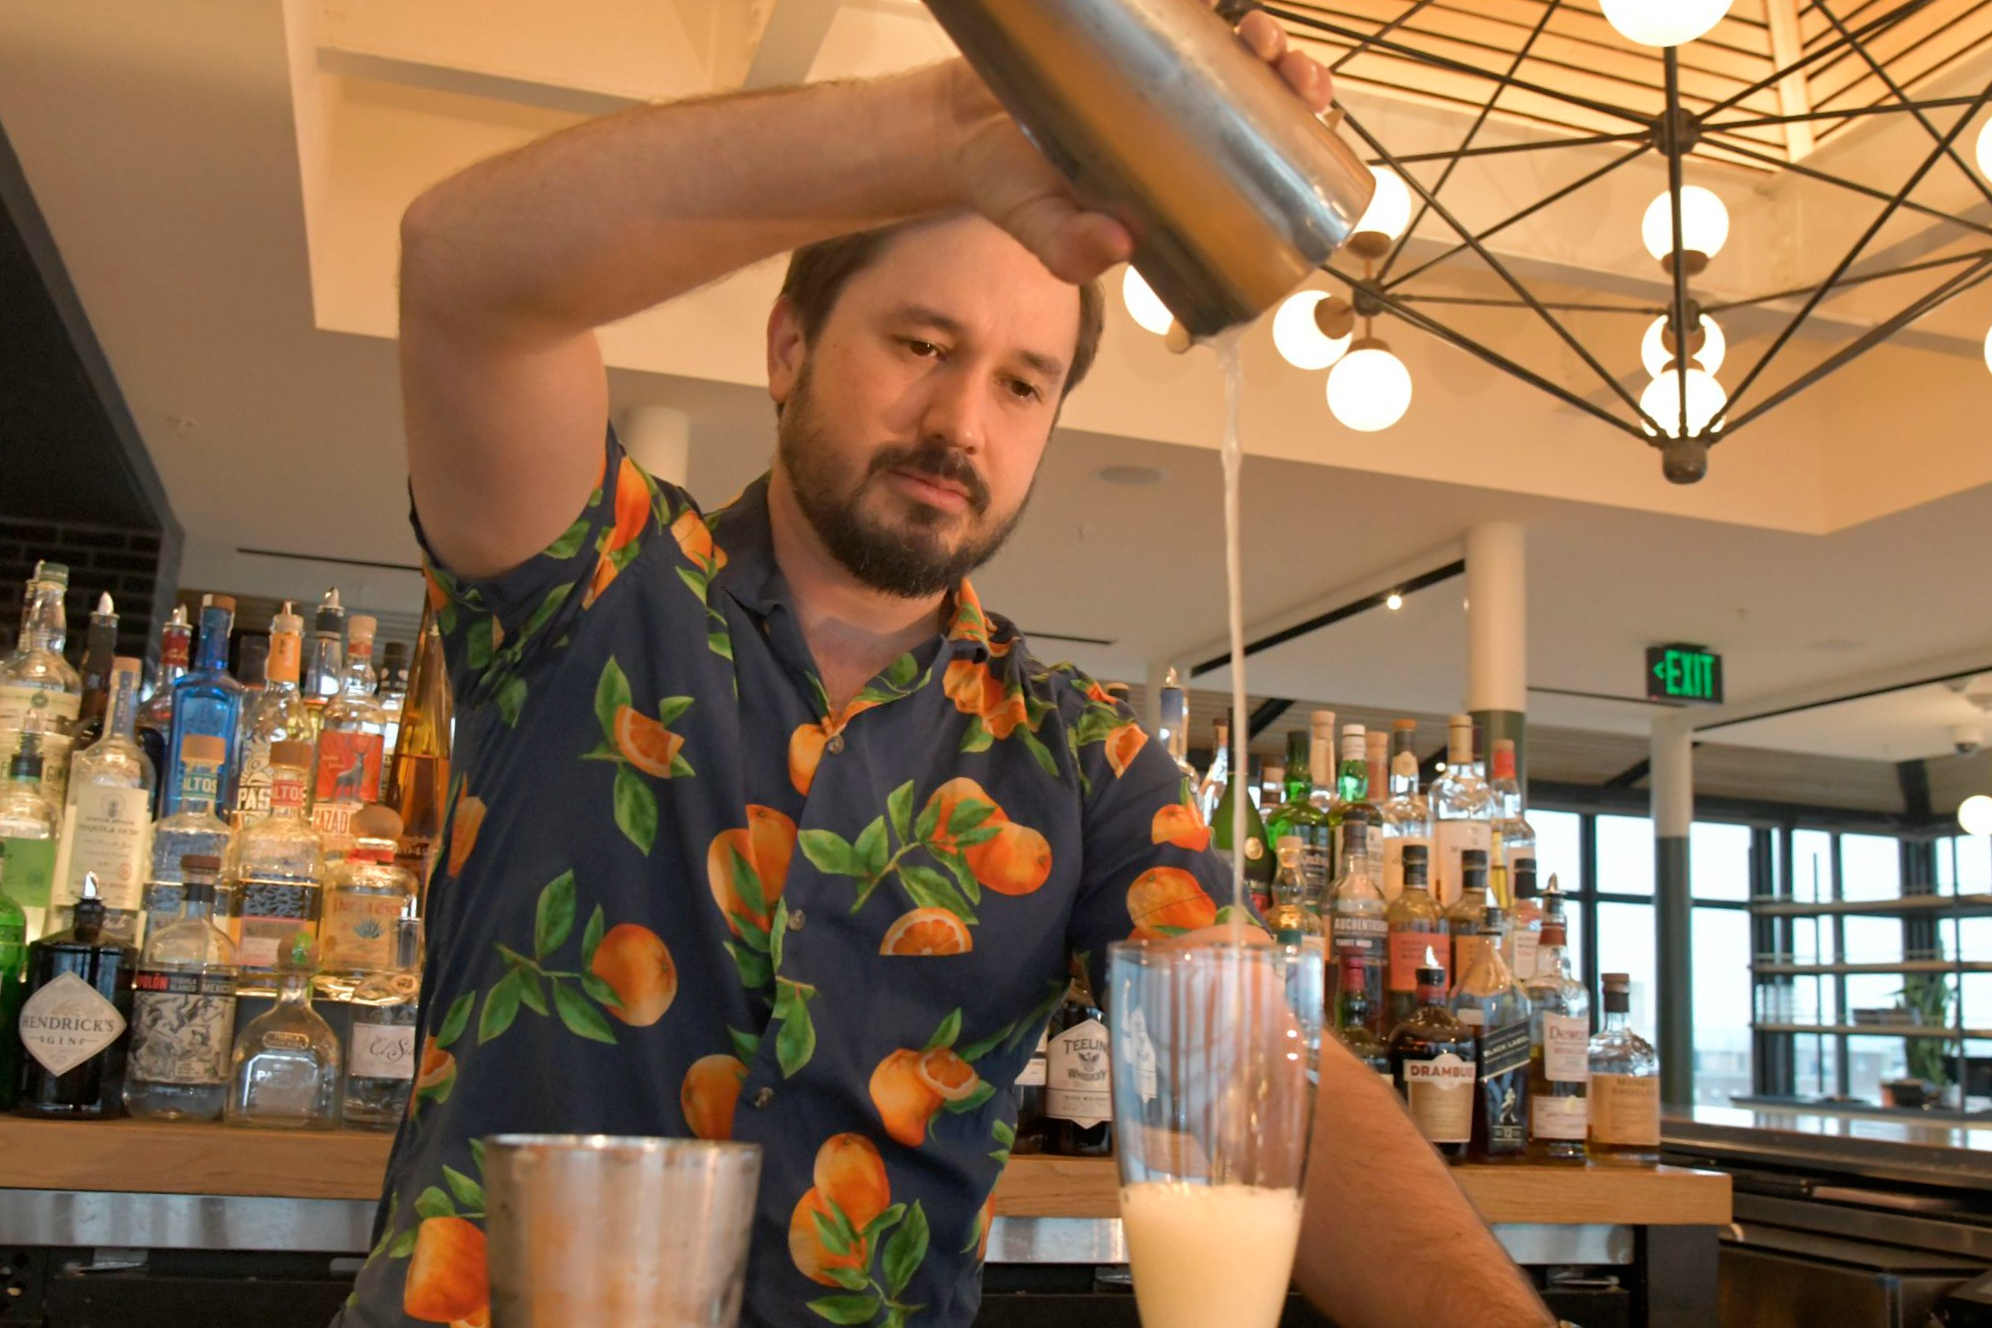 Bartender Christian Parent mixes a spirit-free drink called "Dorothy in the Daytime" at Topside, a restaurant bar on the top floor of Hotel Revival in Mount Vernon.